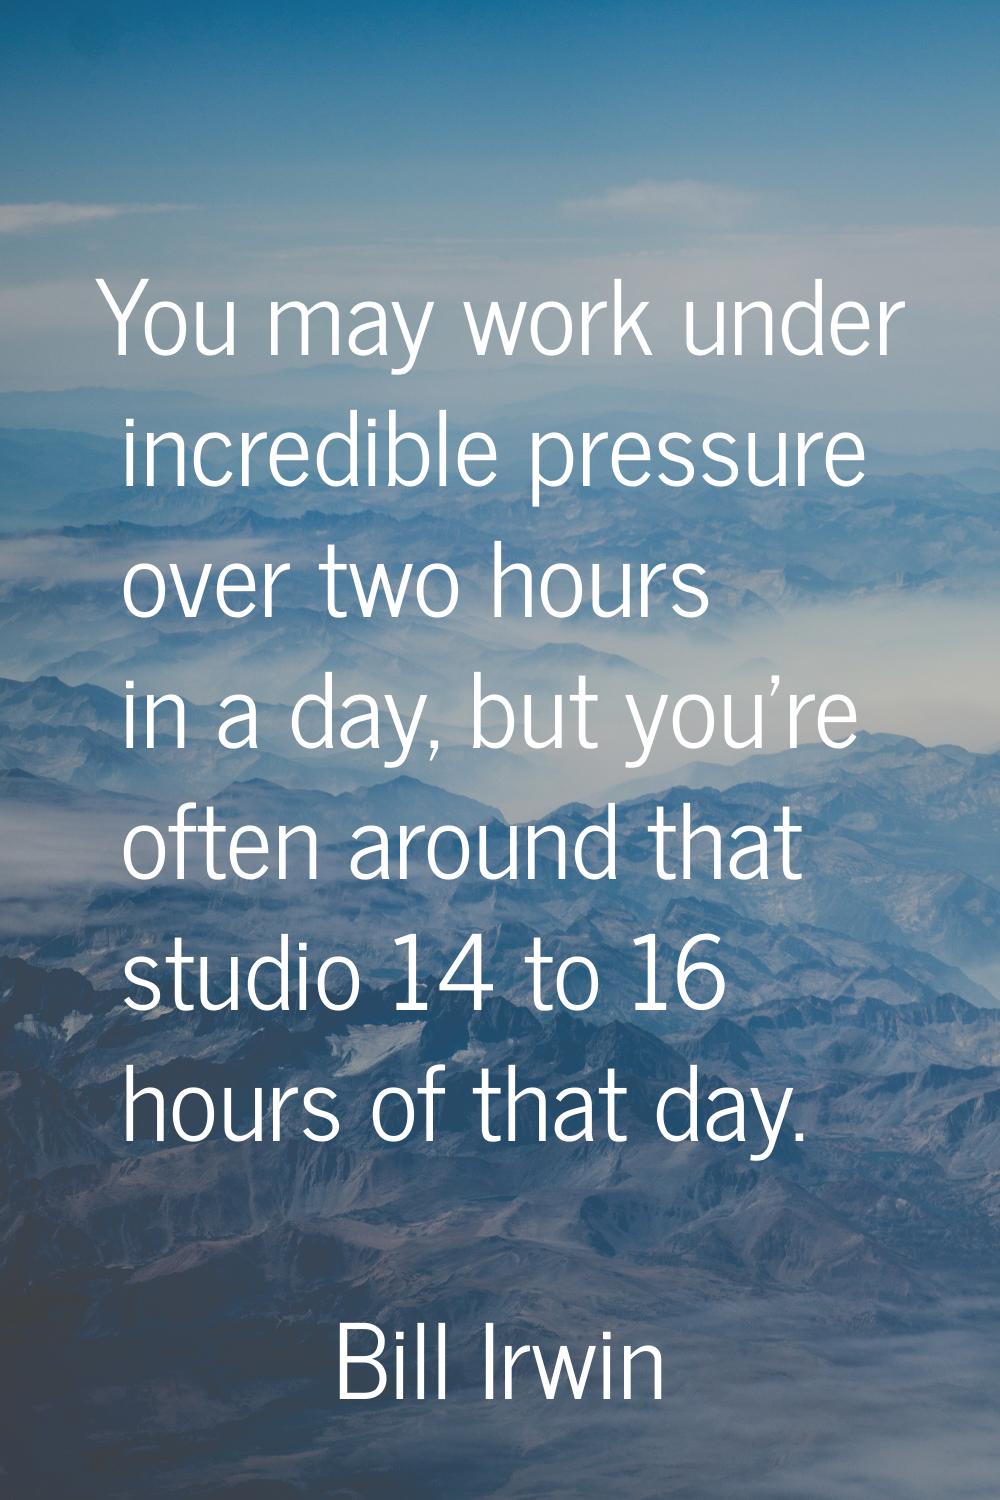 You may work under incredible pressure over two hours in a day, but you're often around that studio